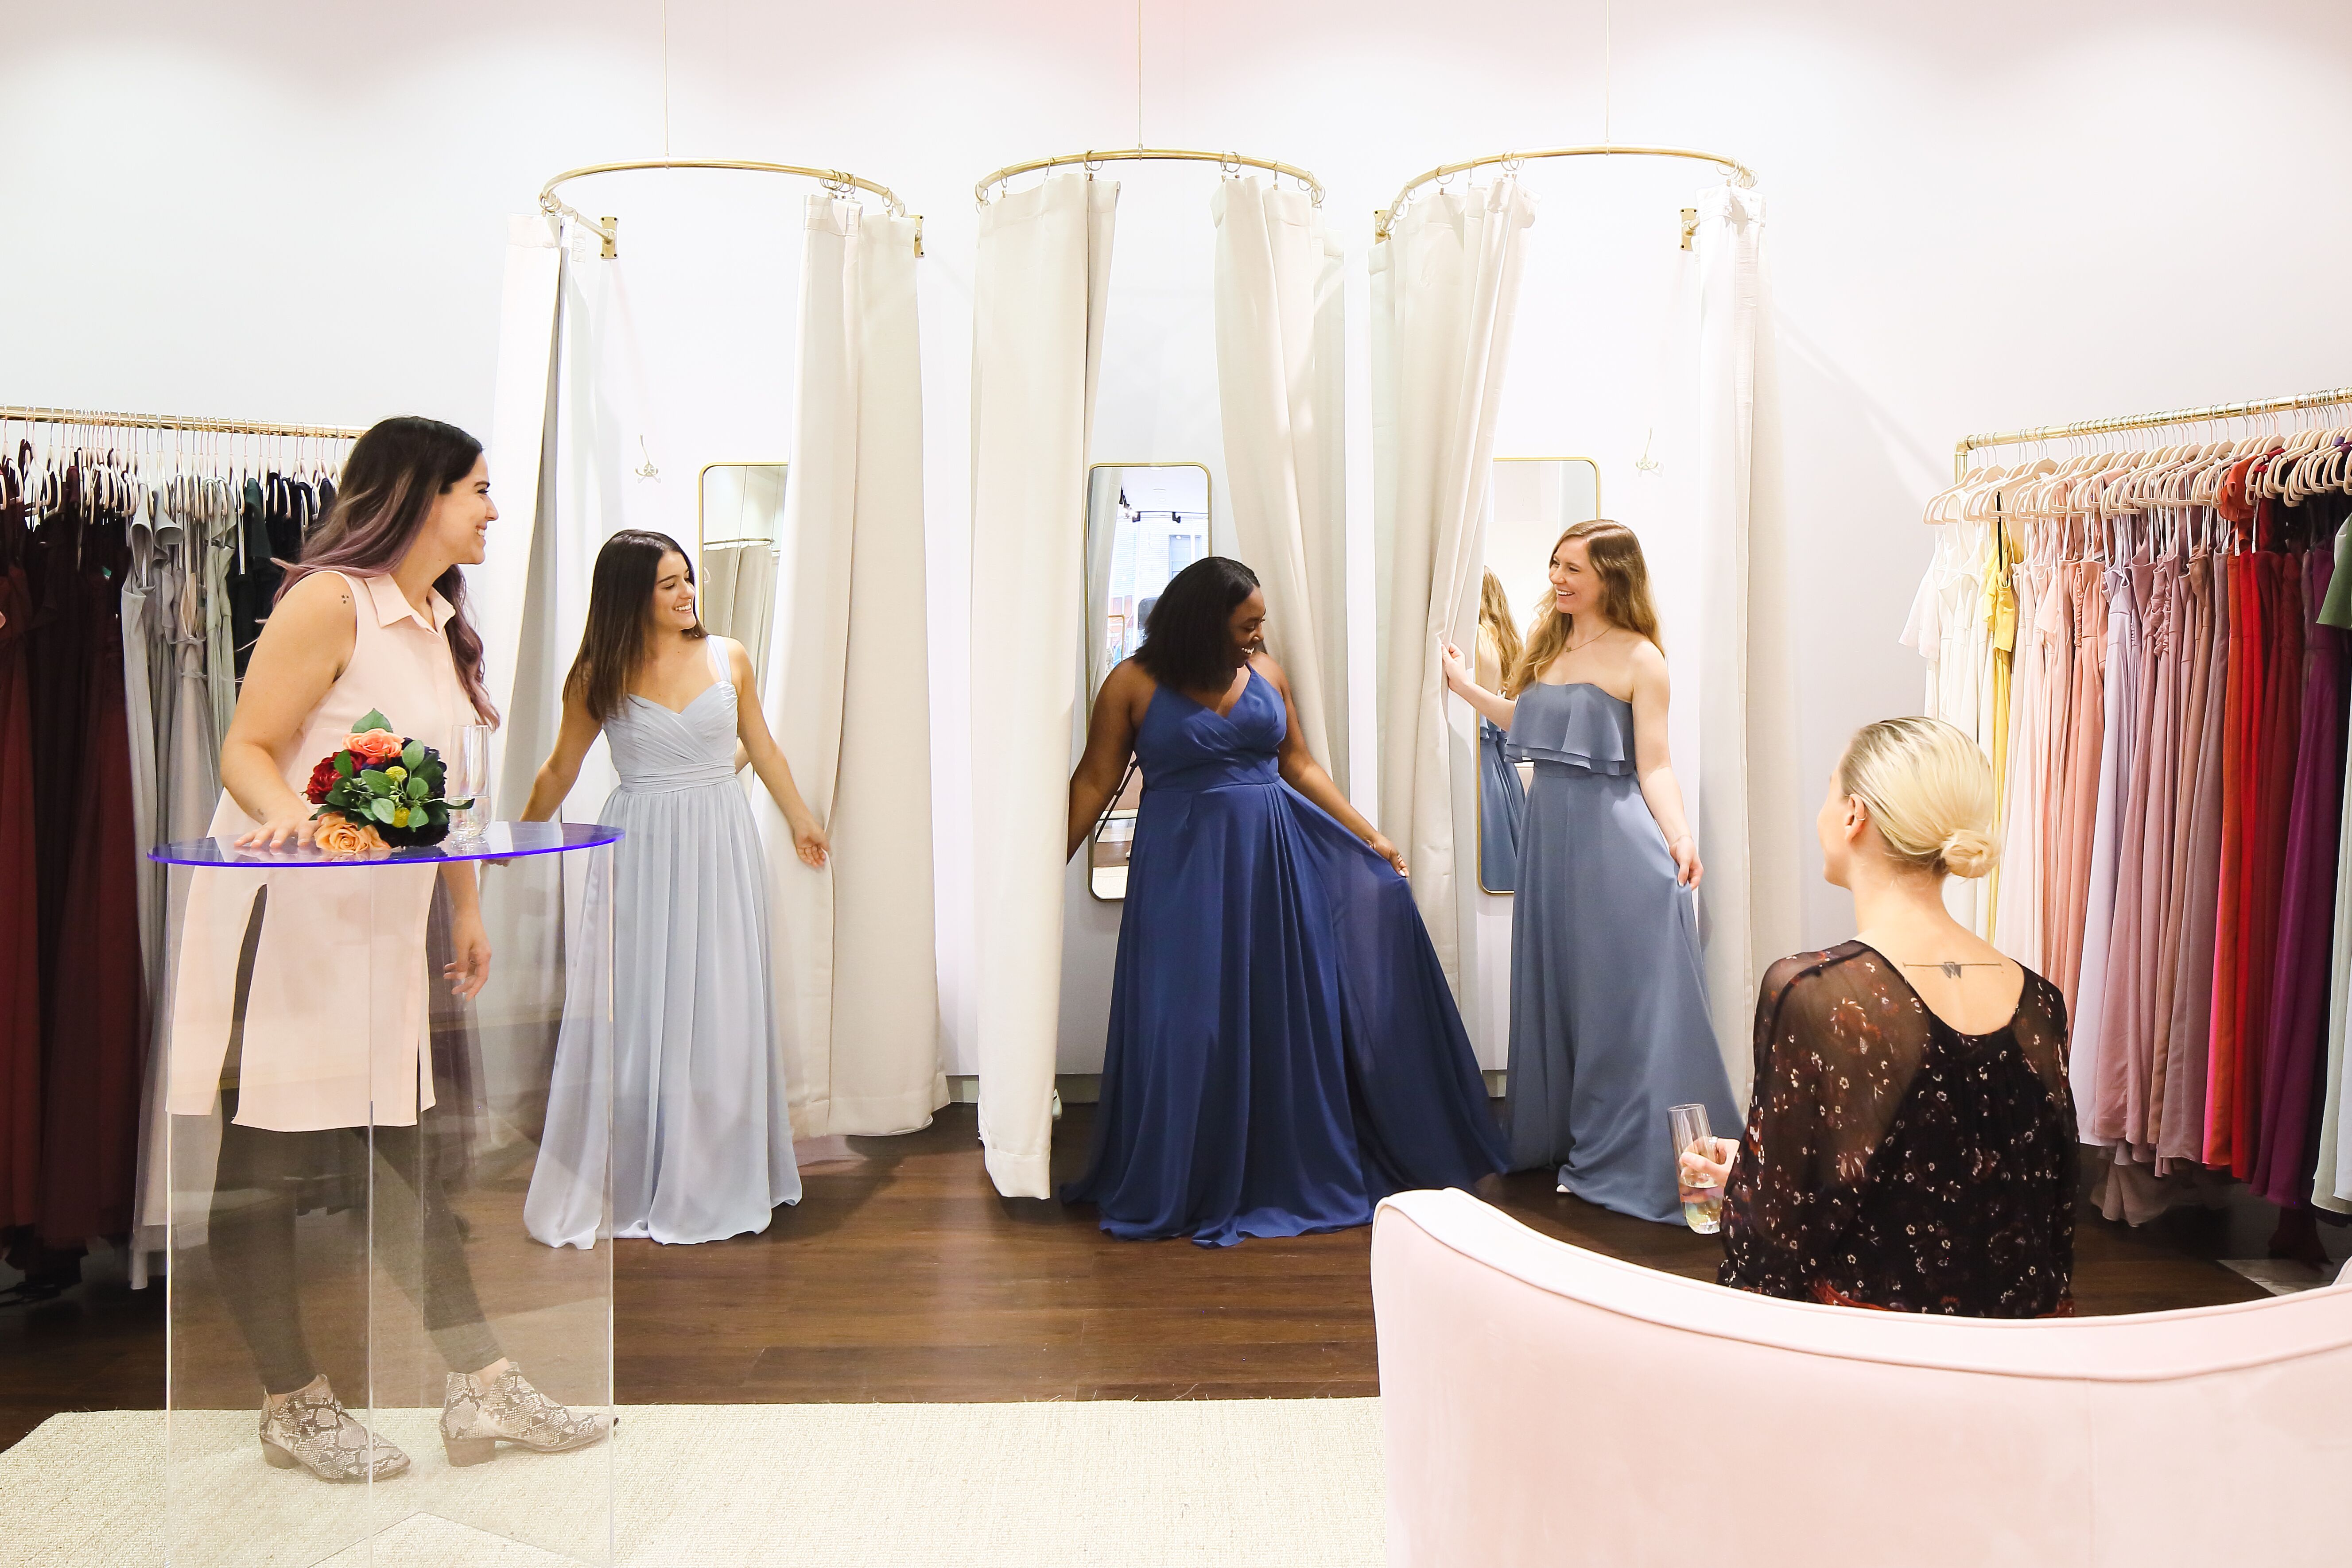 Women in a store are trying on bridesmaid dresses.